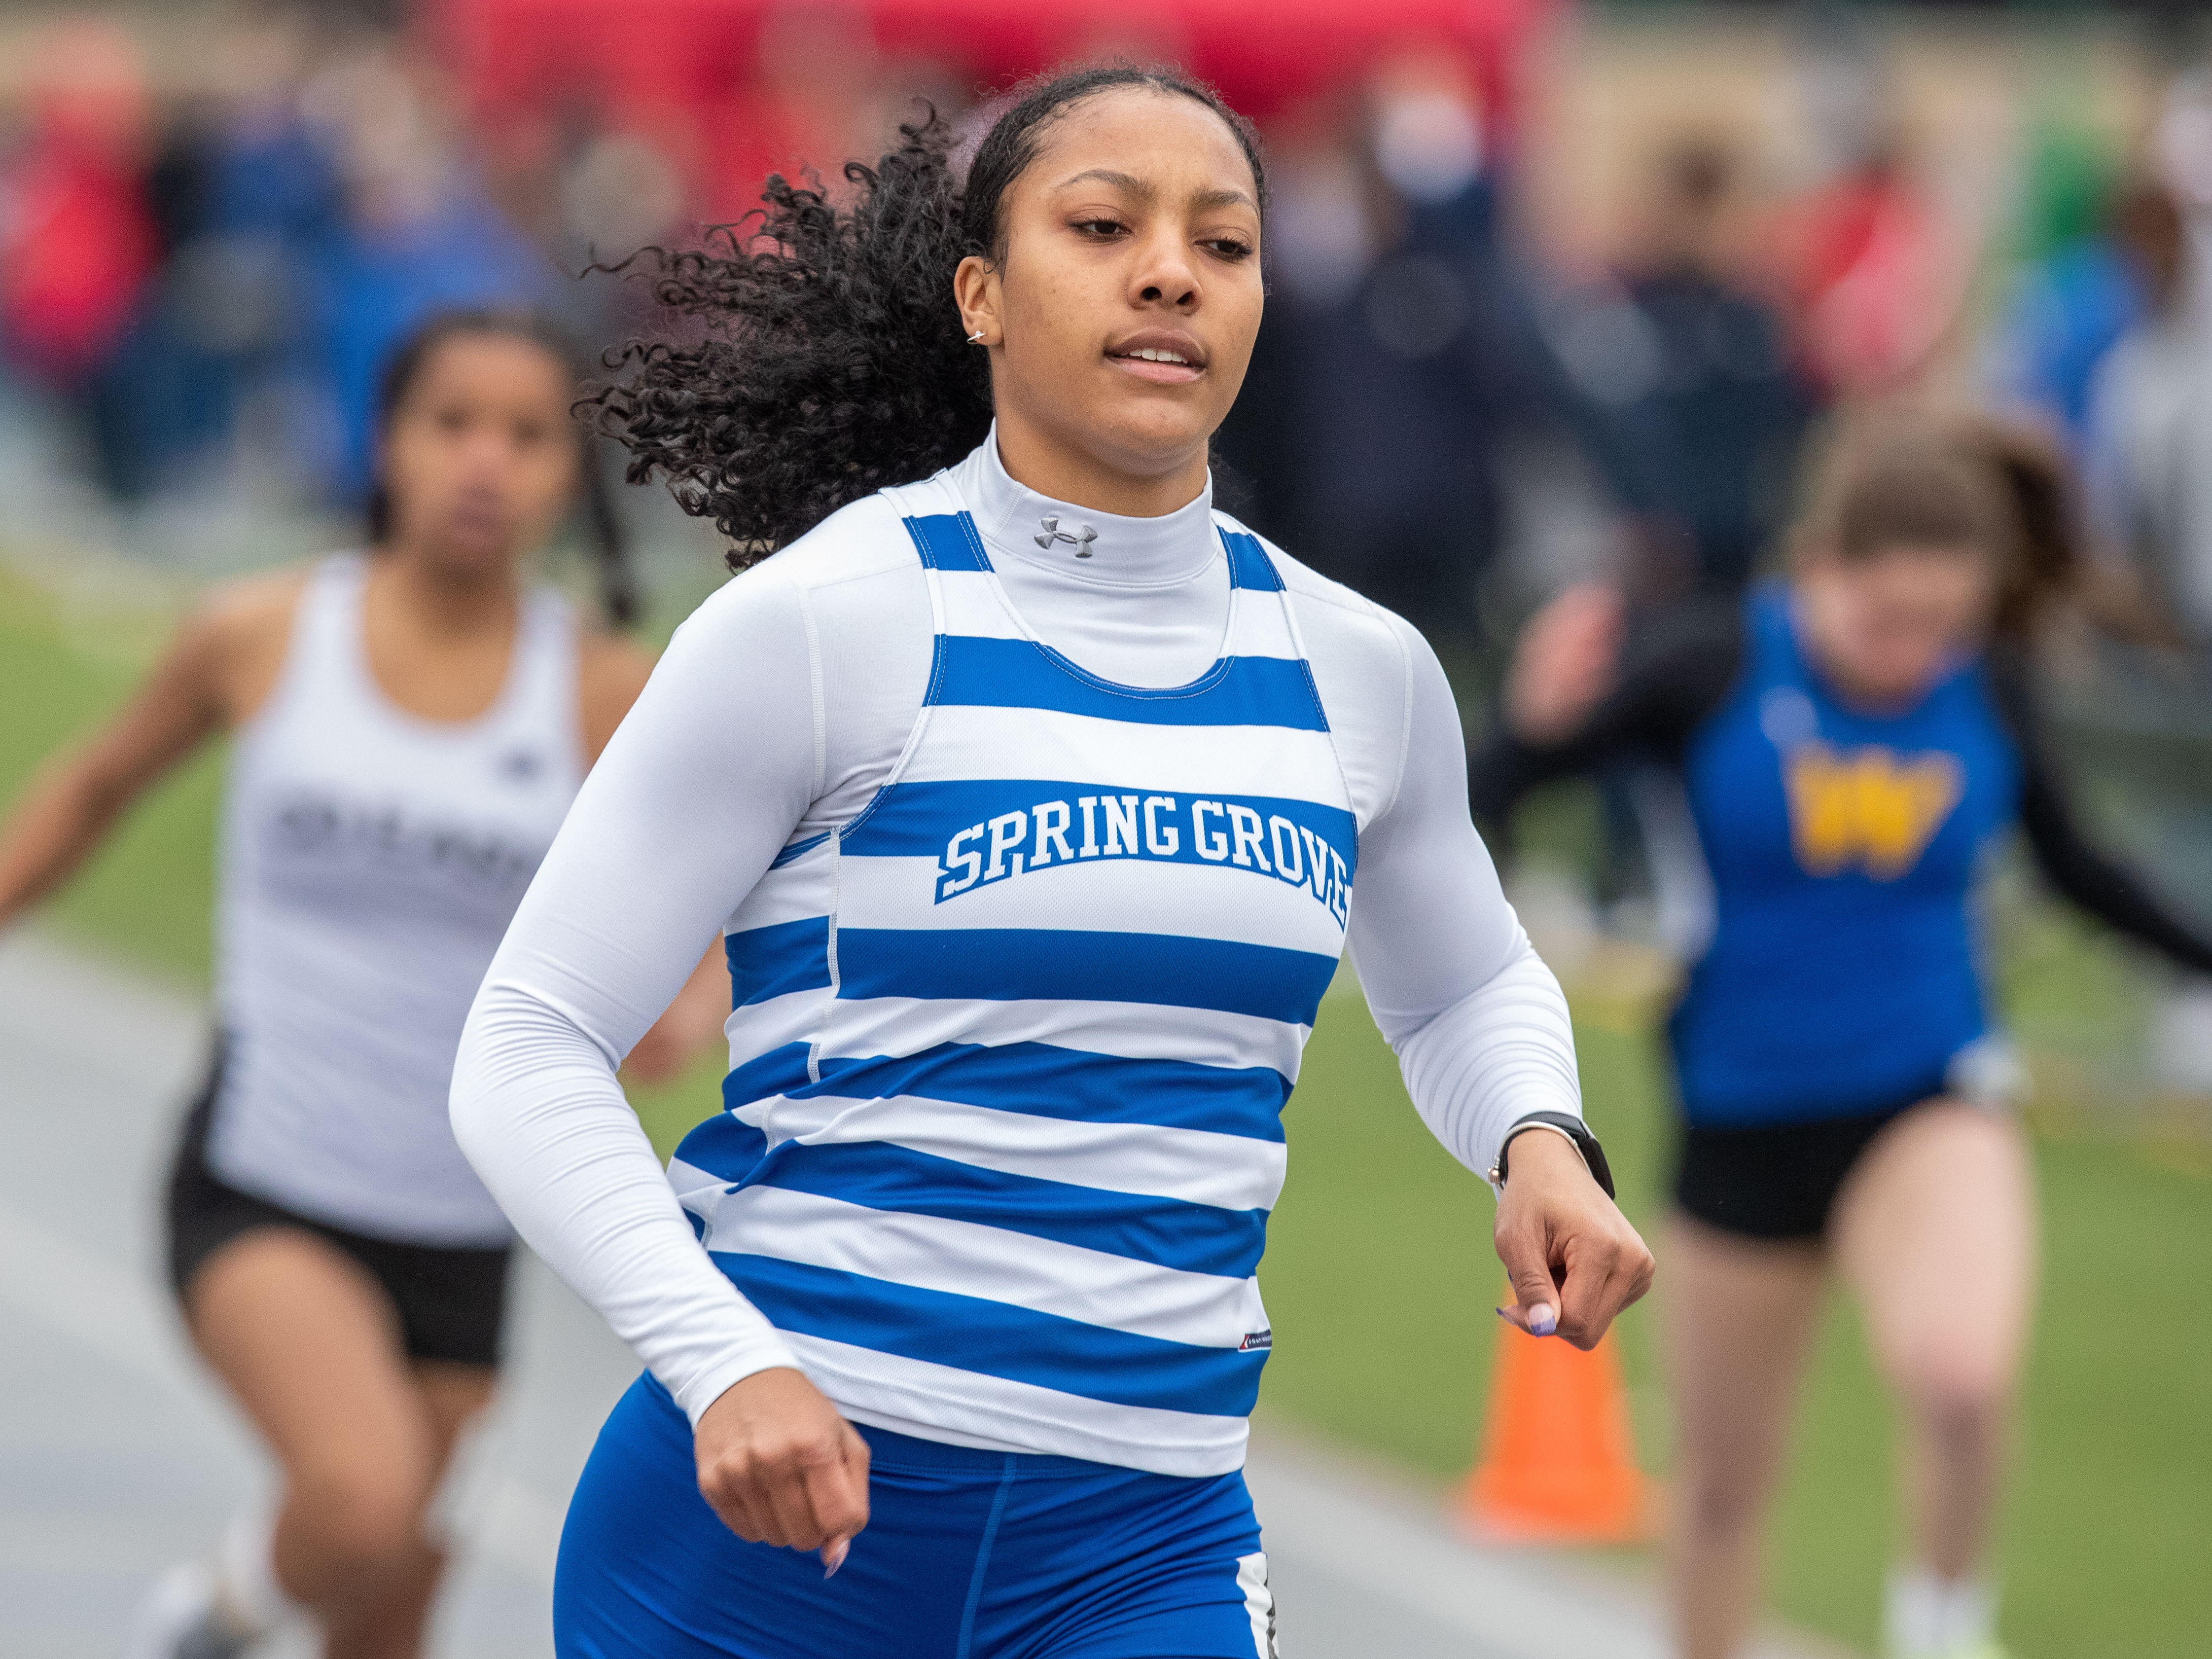 Laila Campbell, Spring Grove, easily wins the 100 meter dash, in 12.08, at the 2023 Tim Cook Memorial Invitational track & field meet at Chambersburg, Pa., Mar. 25, 2023.Mark Pynes | pennlive.com